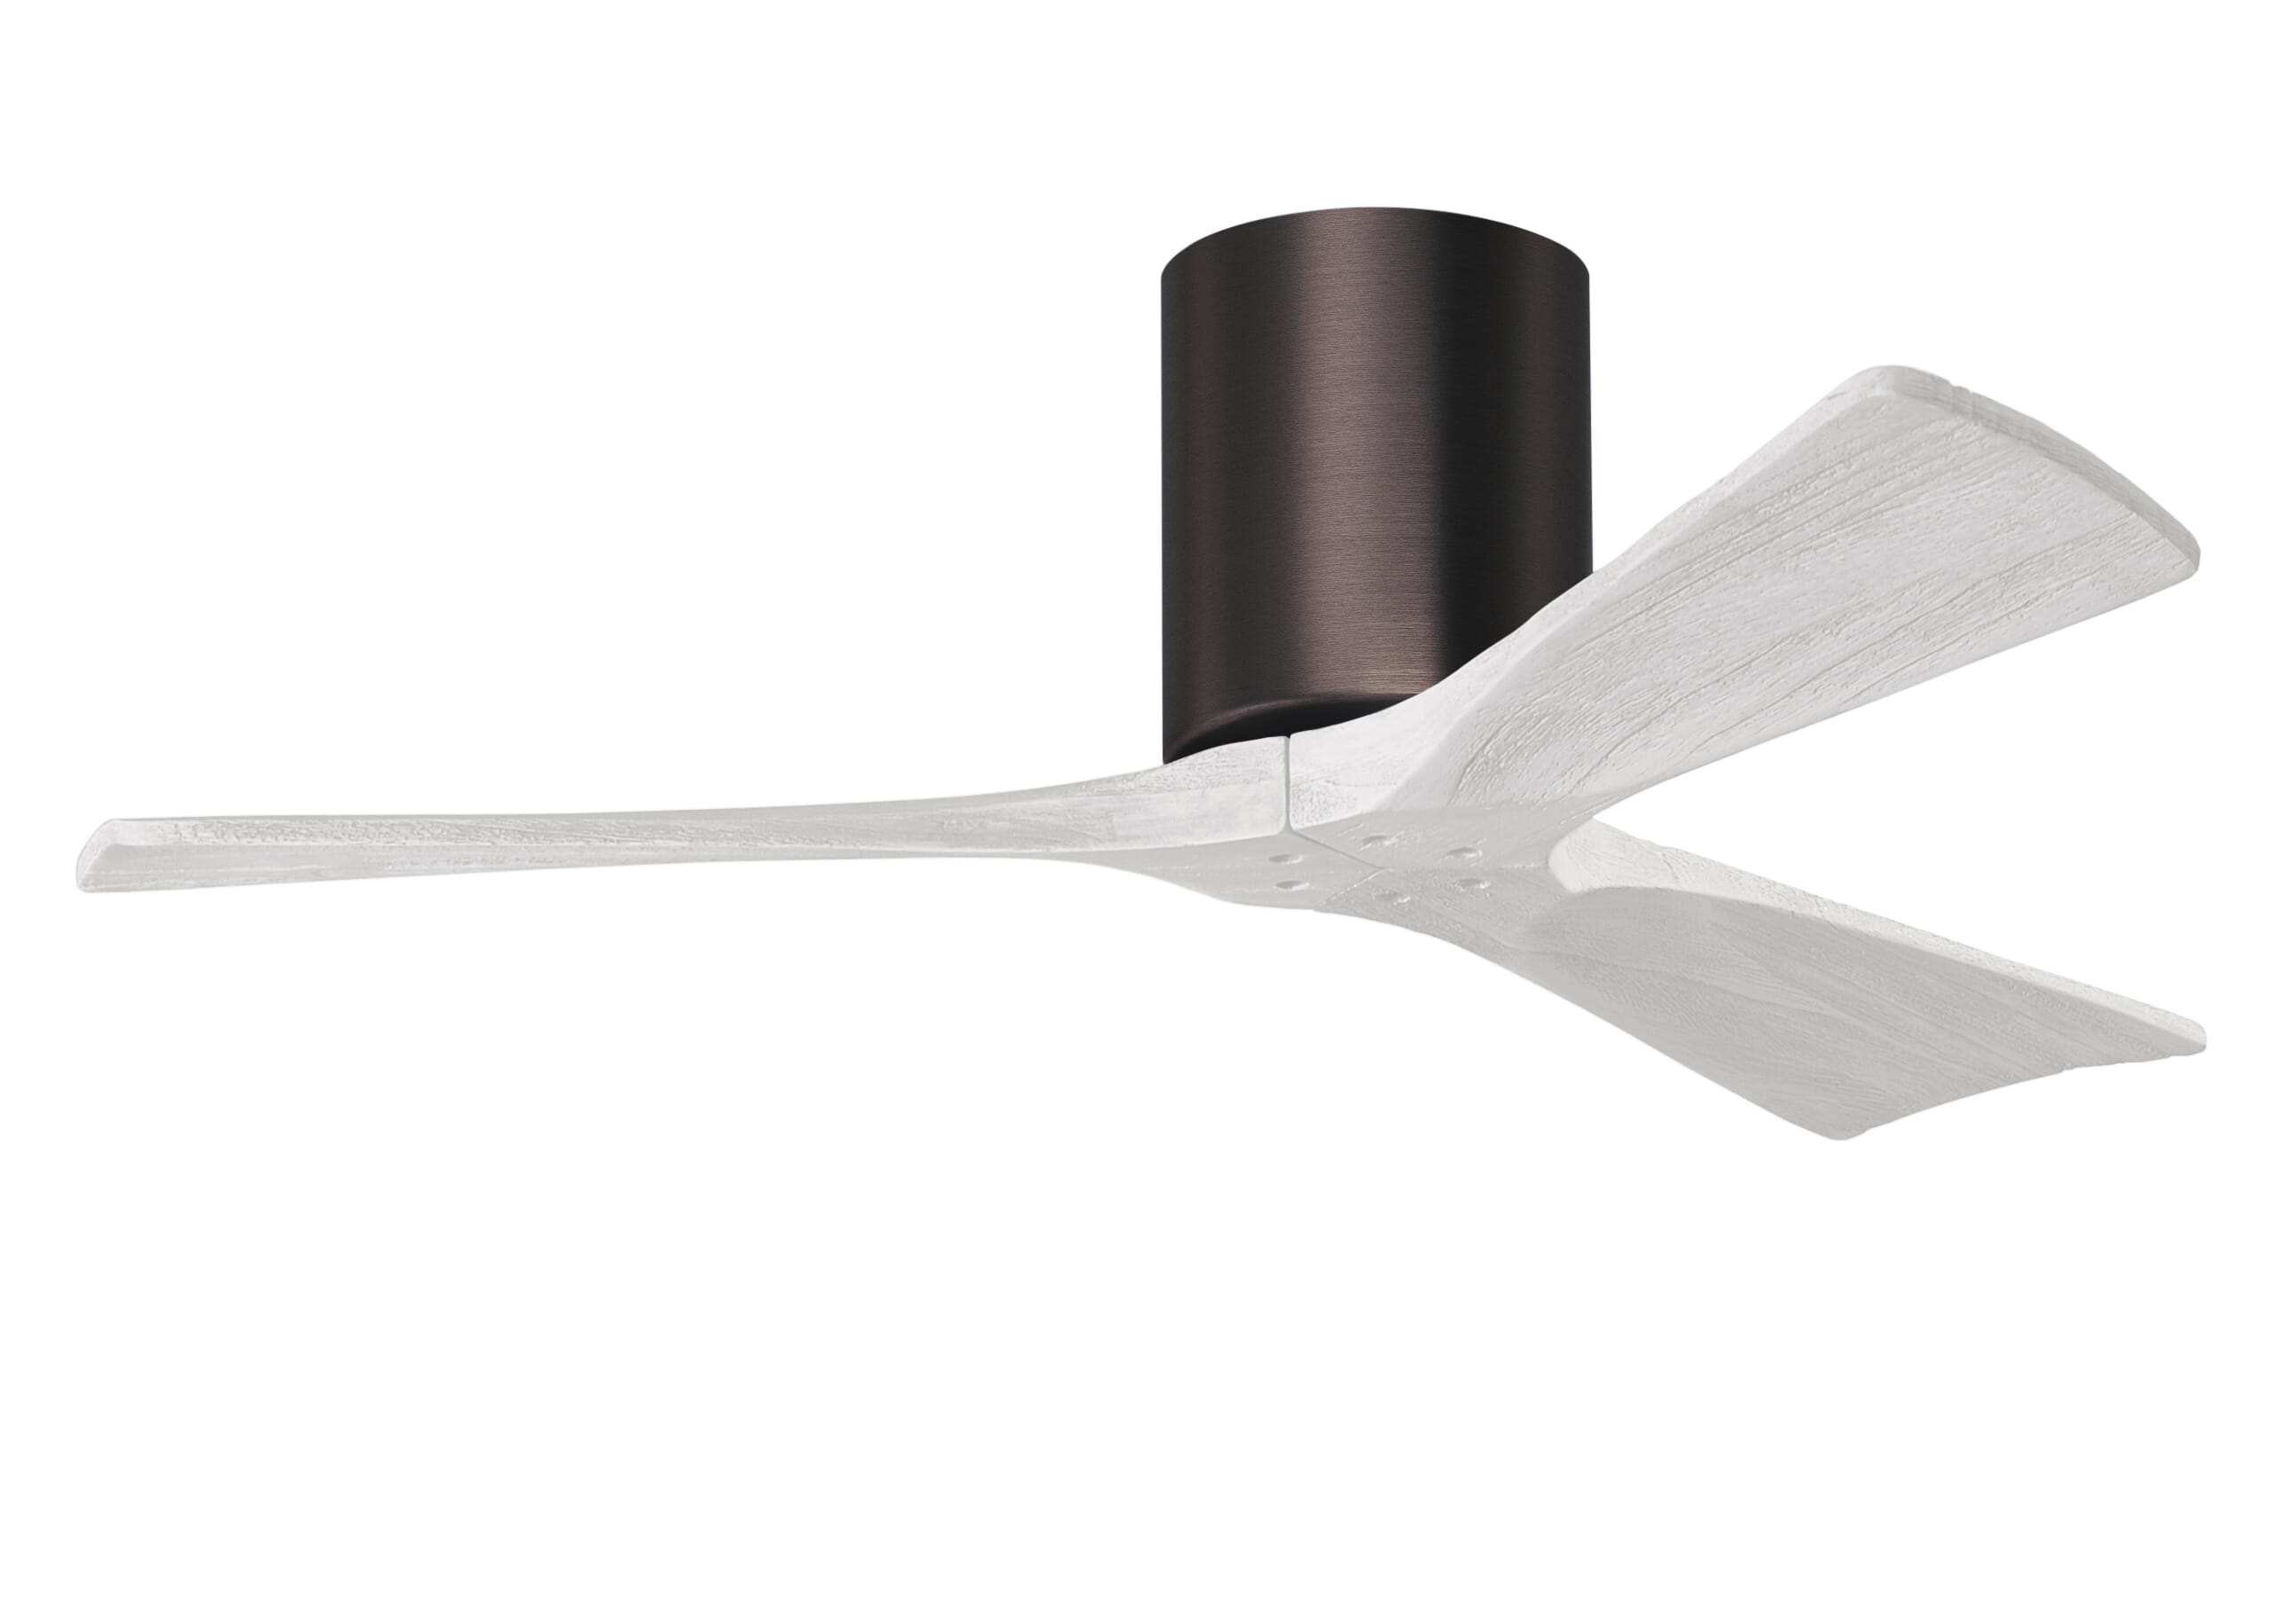 Irene 6-Speed DC 42"" Ceiling Fan in Brushed Bronze with Matte White blades -  Matthews Fan Company, IR3H-BB-MWH-42